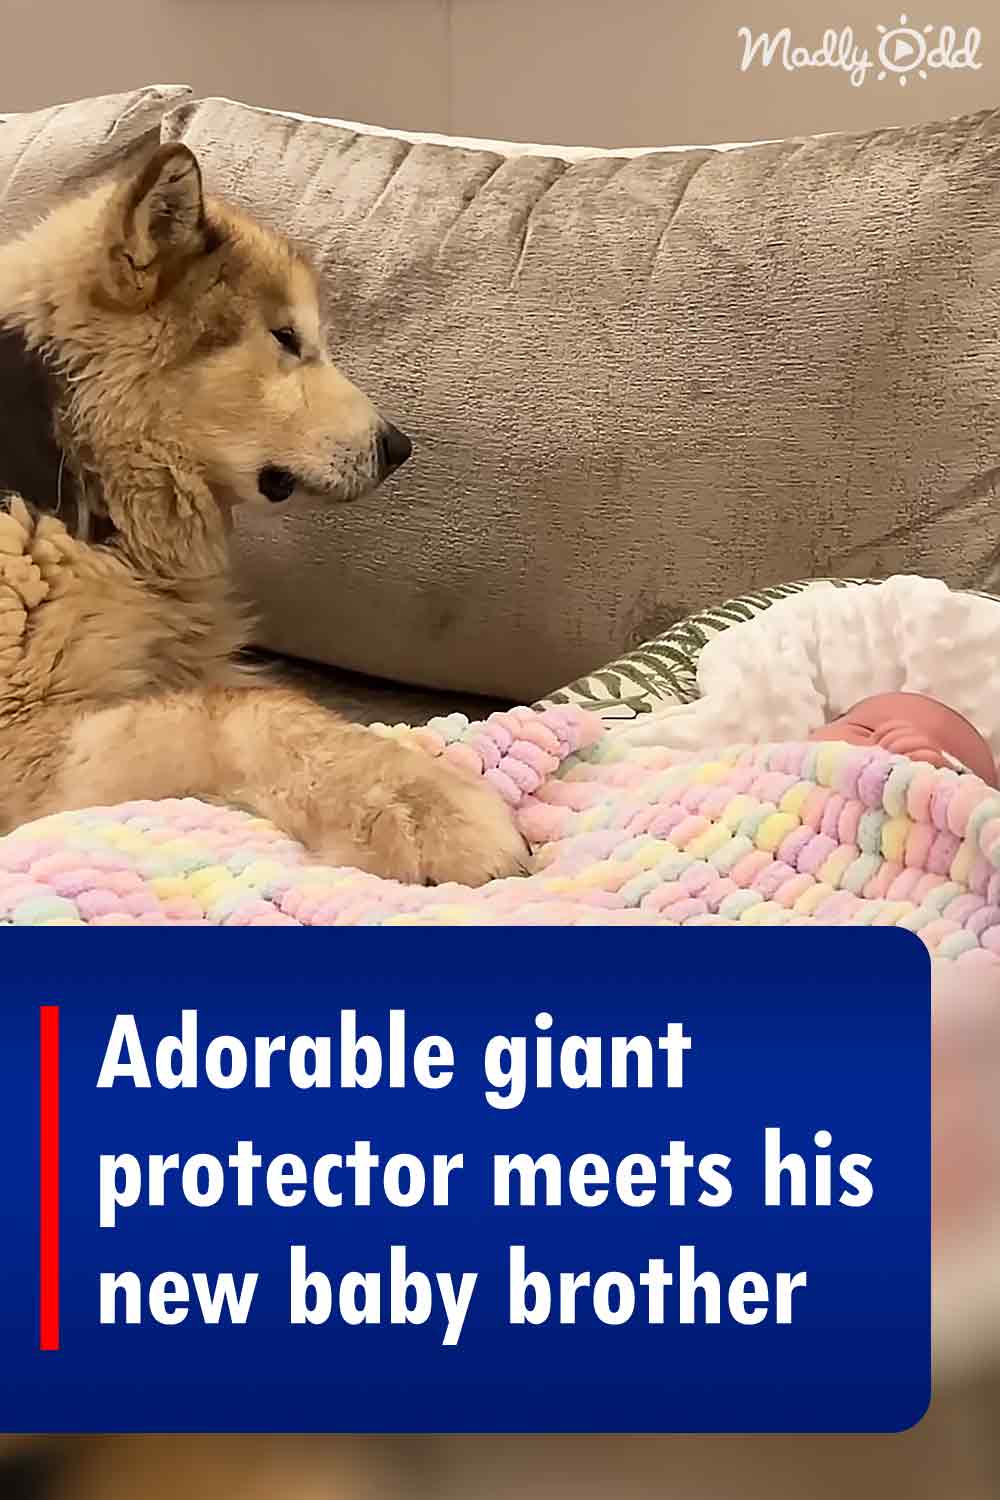 Adorable giant protector meets his new baby brother